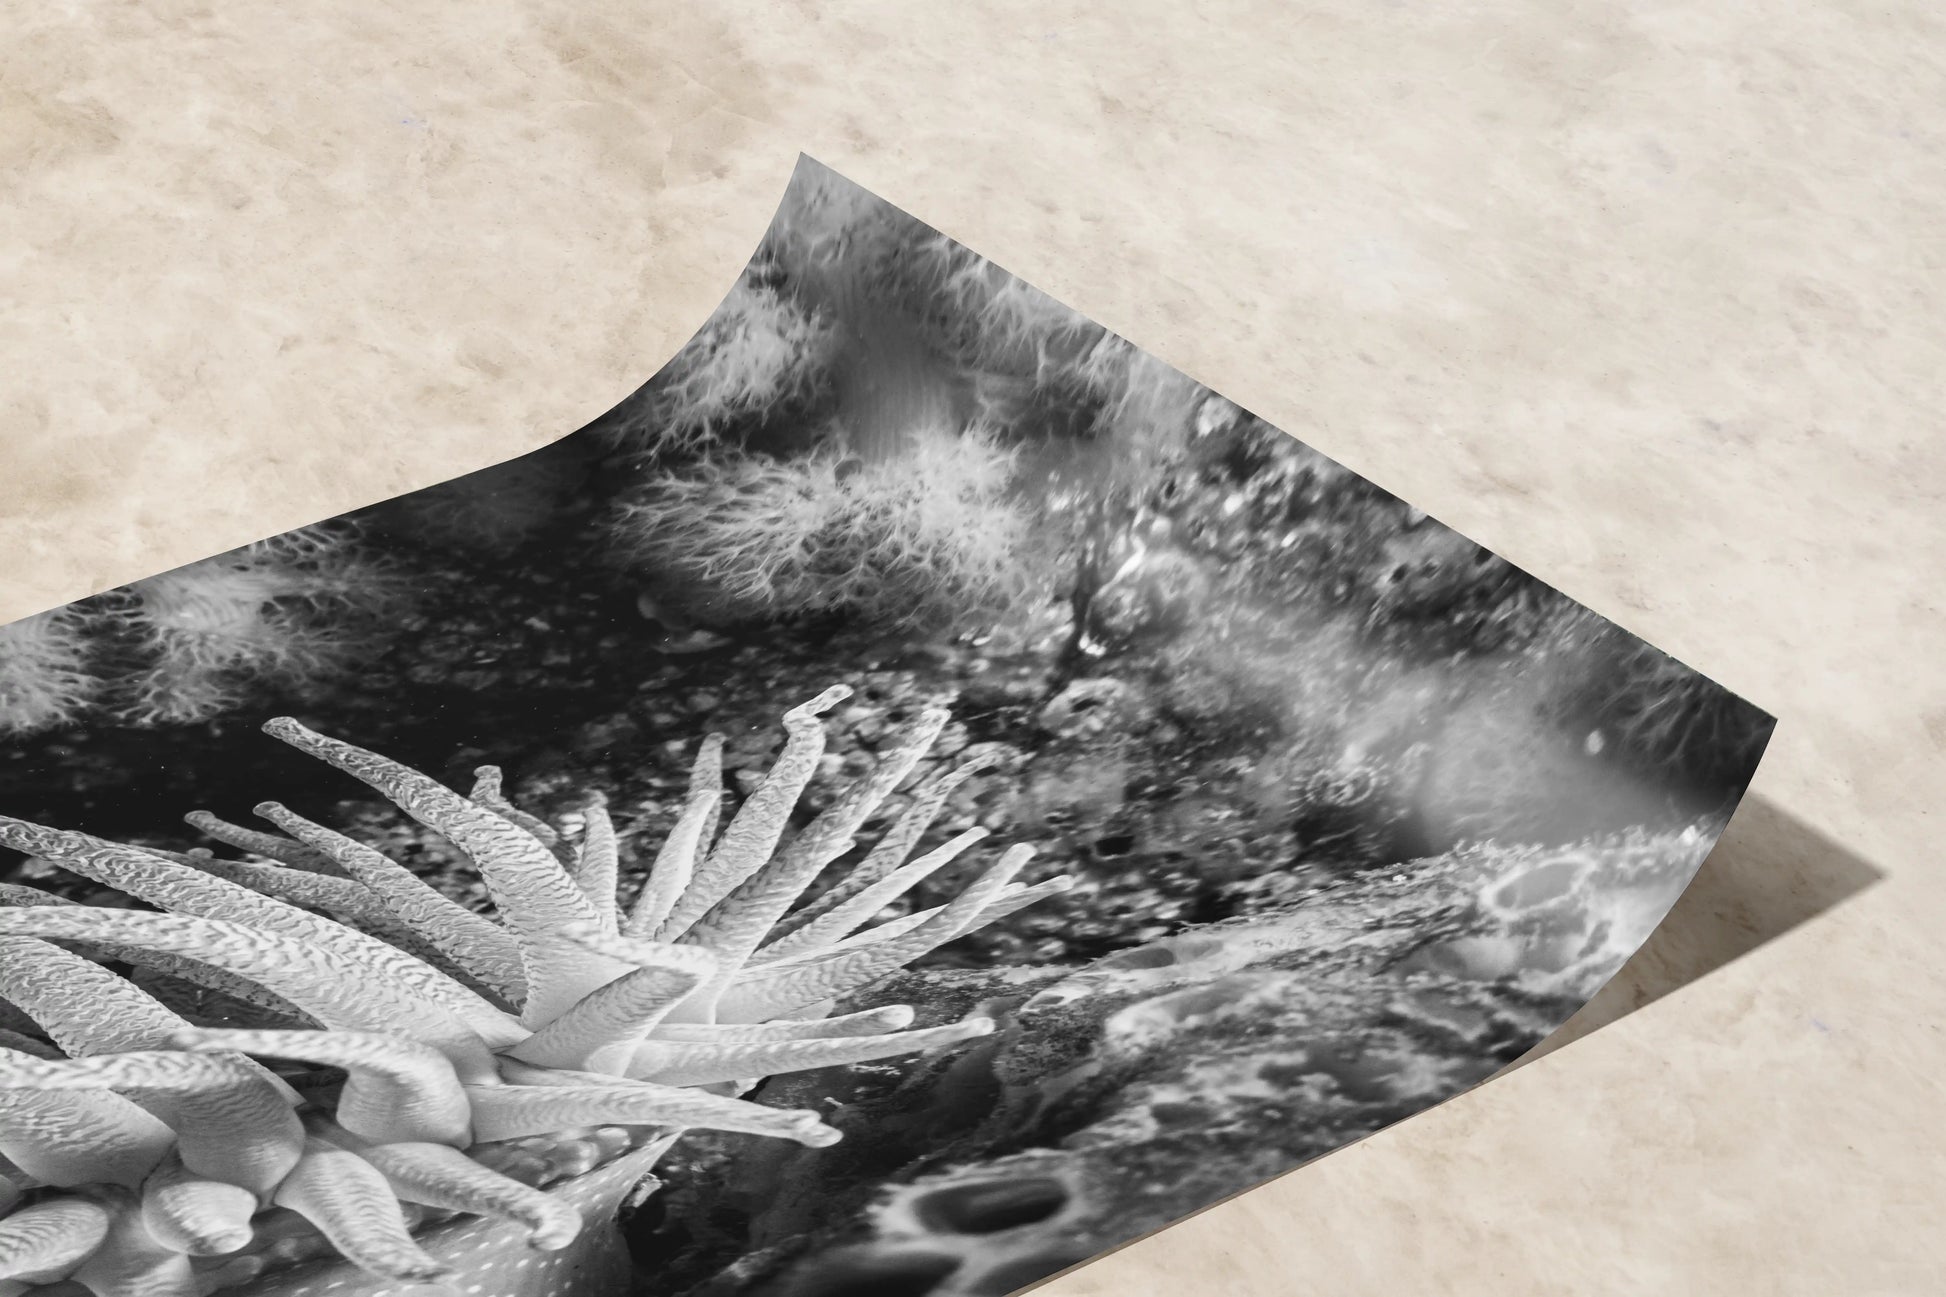 A premium paper print of a black and white photograph depicting a detailed Crimson Anemone underwater, displaying sharp contrasts.